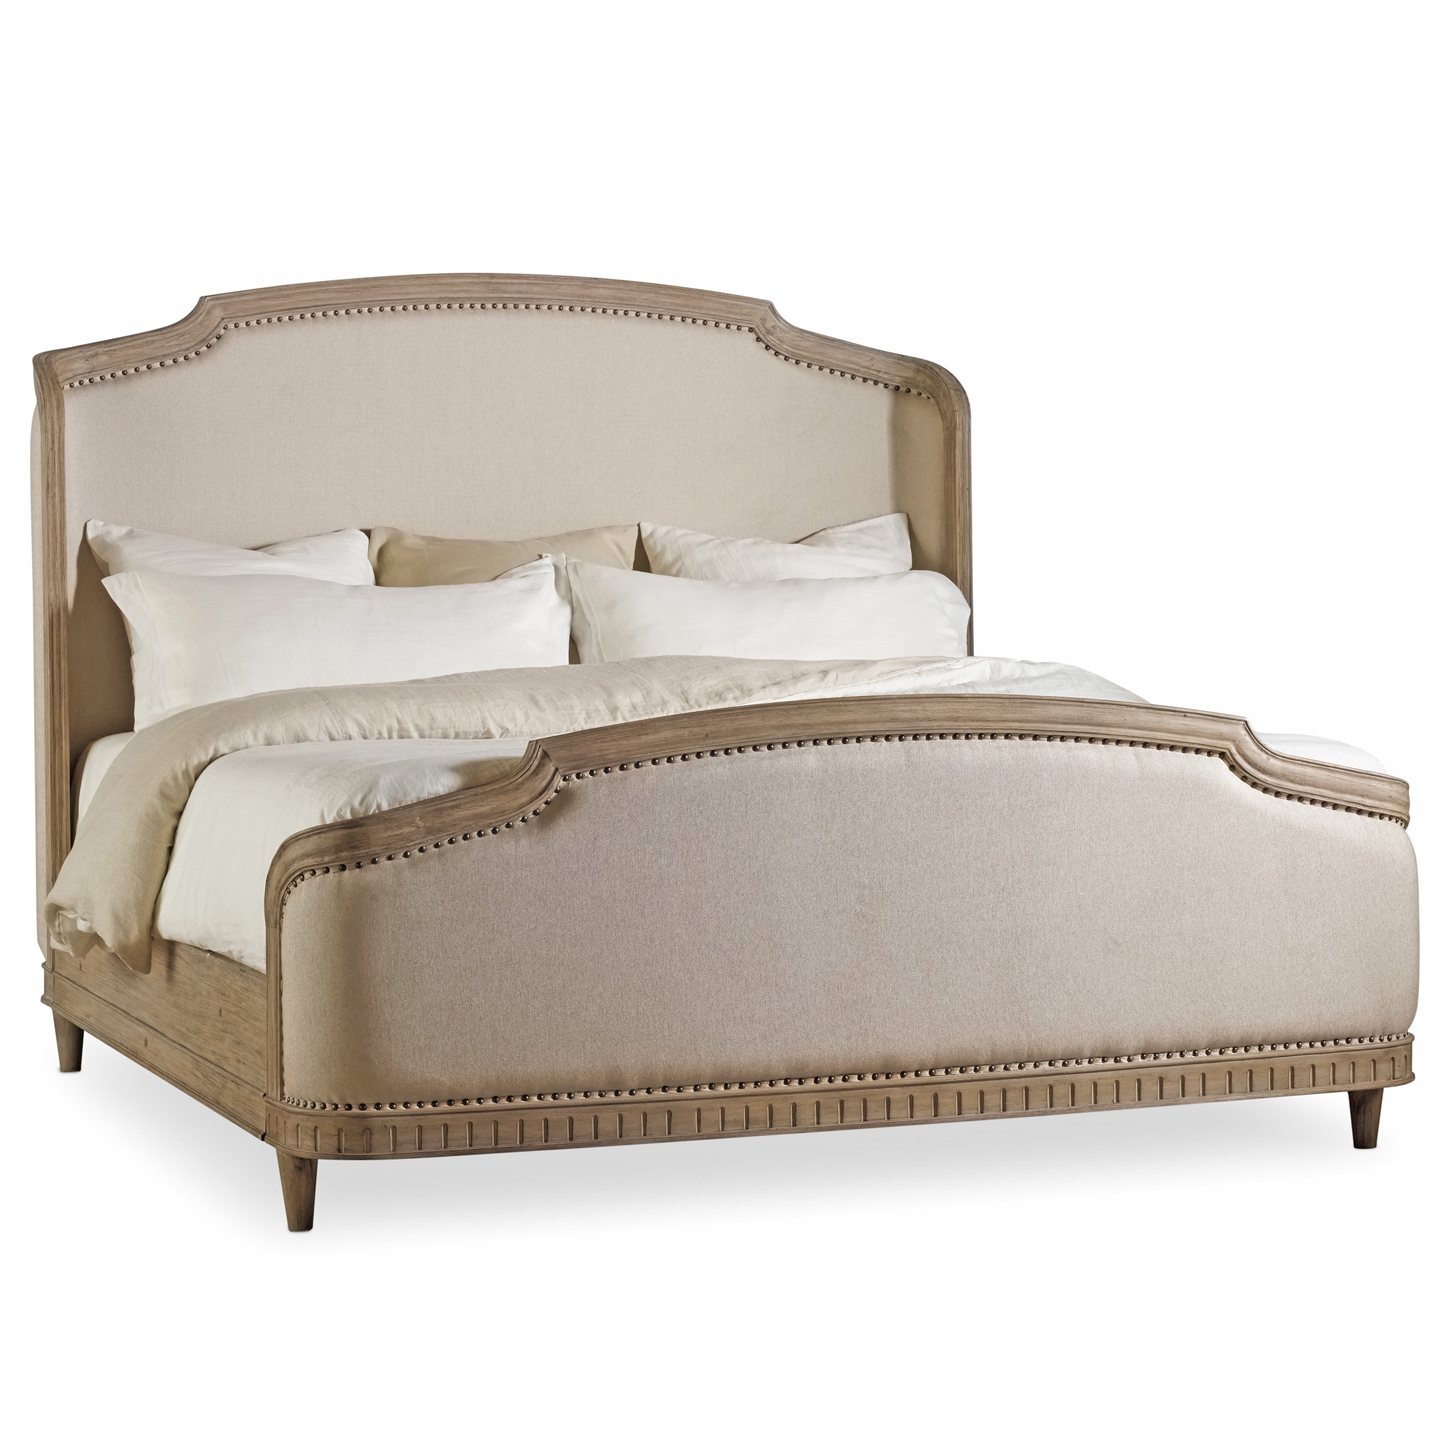 Moira French Country Upholstered Shelter Bed - Queen - Image 0